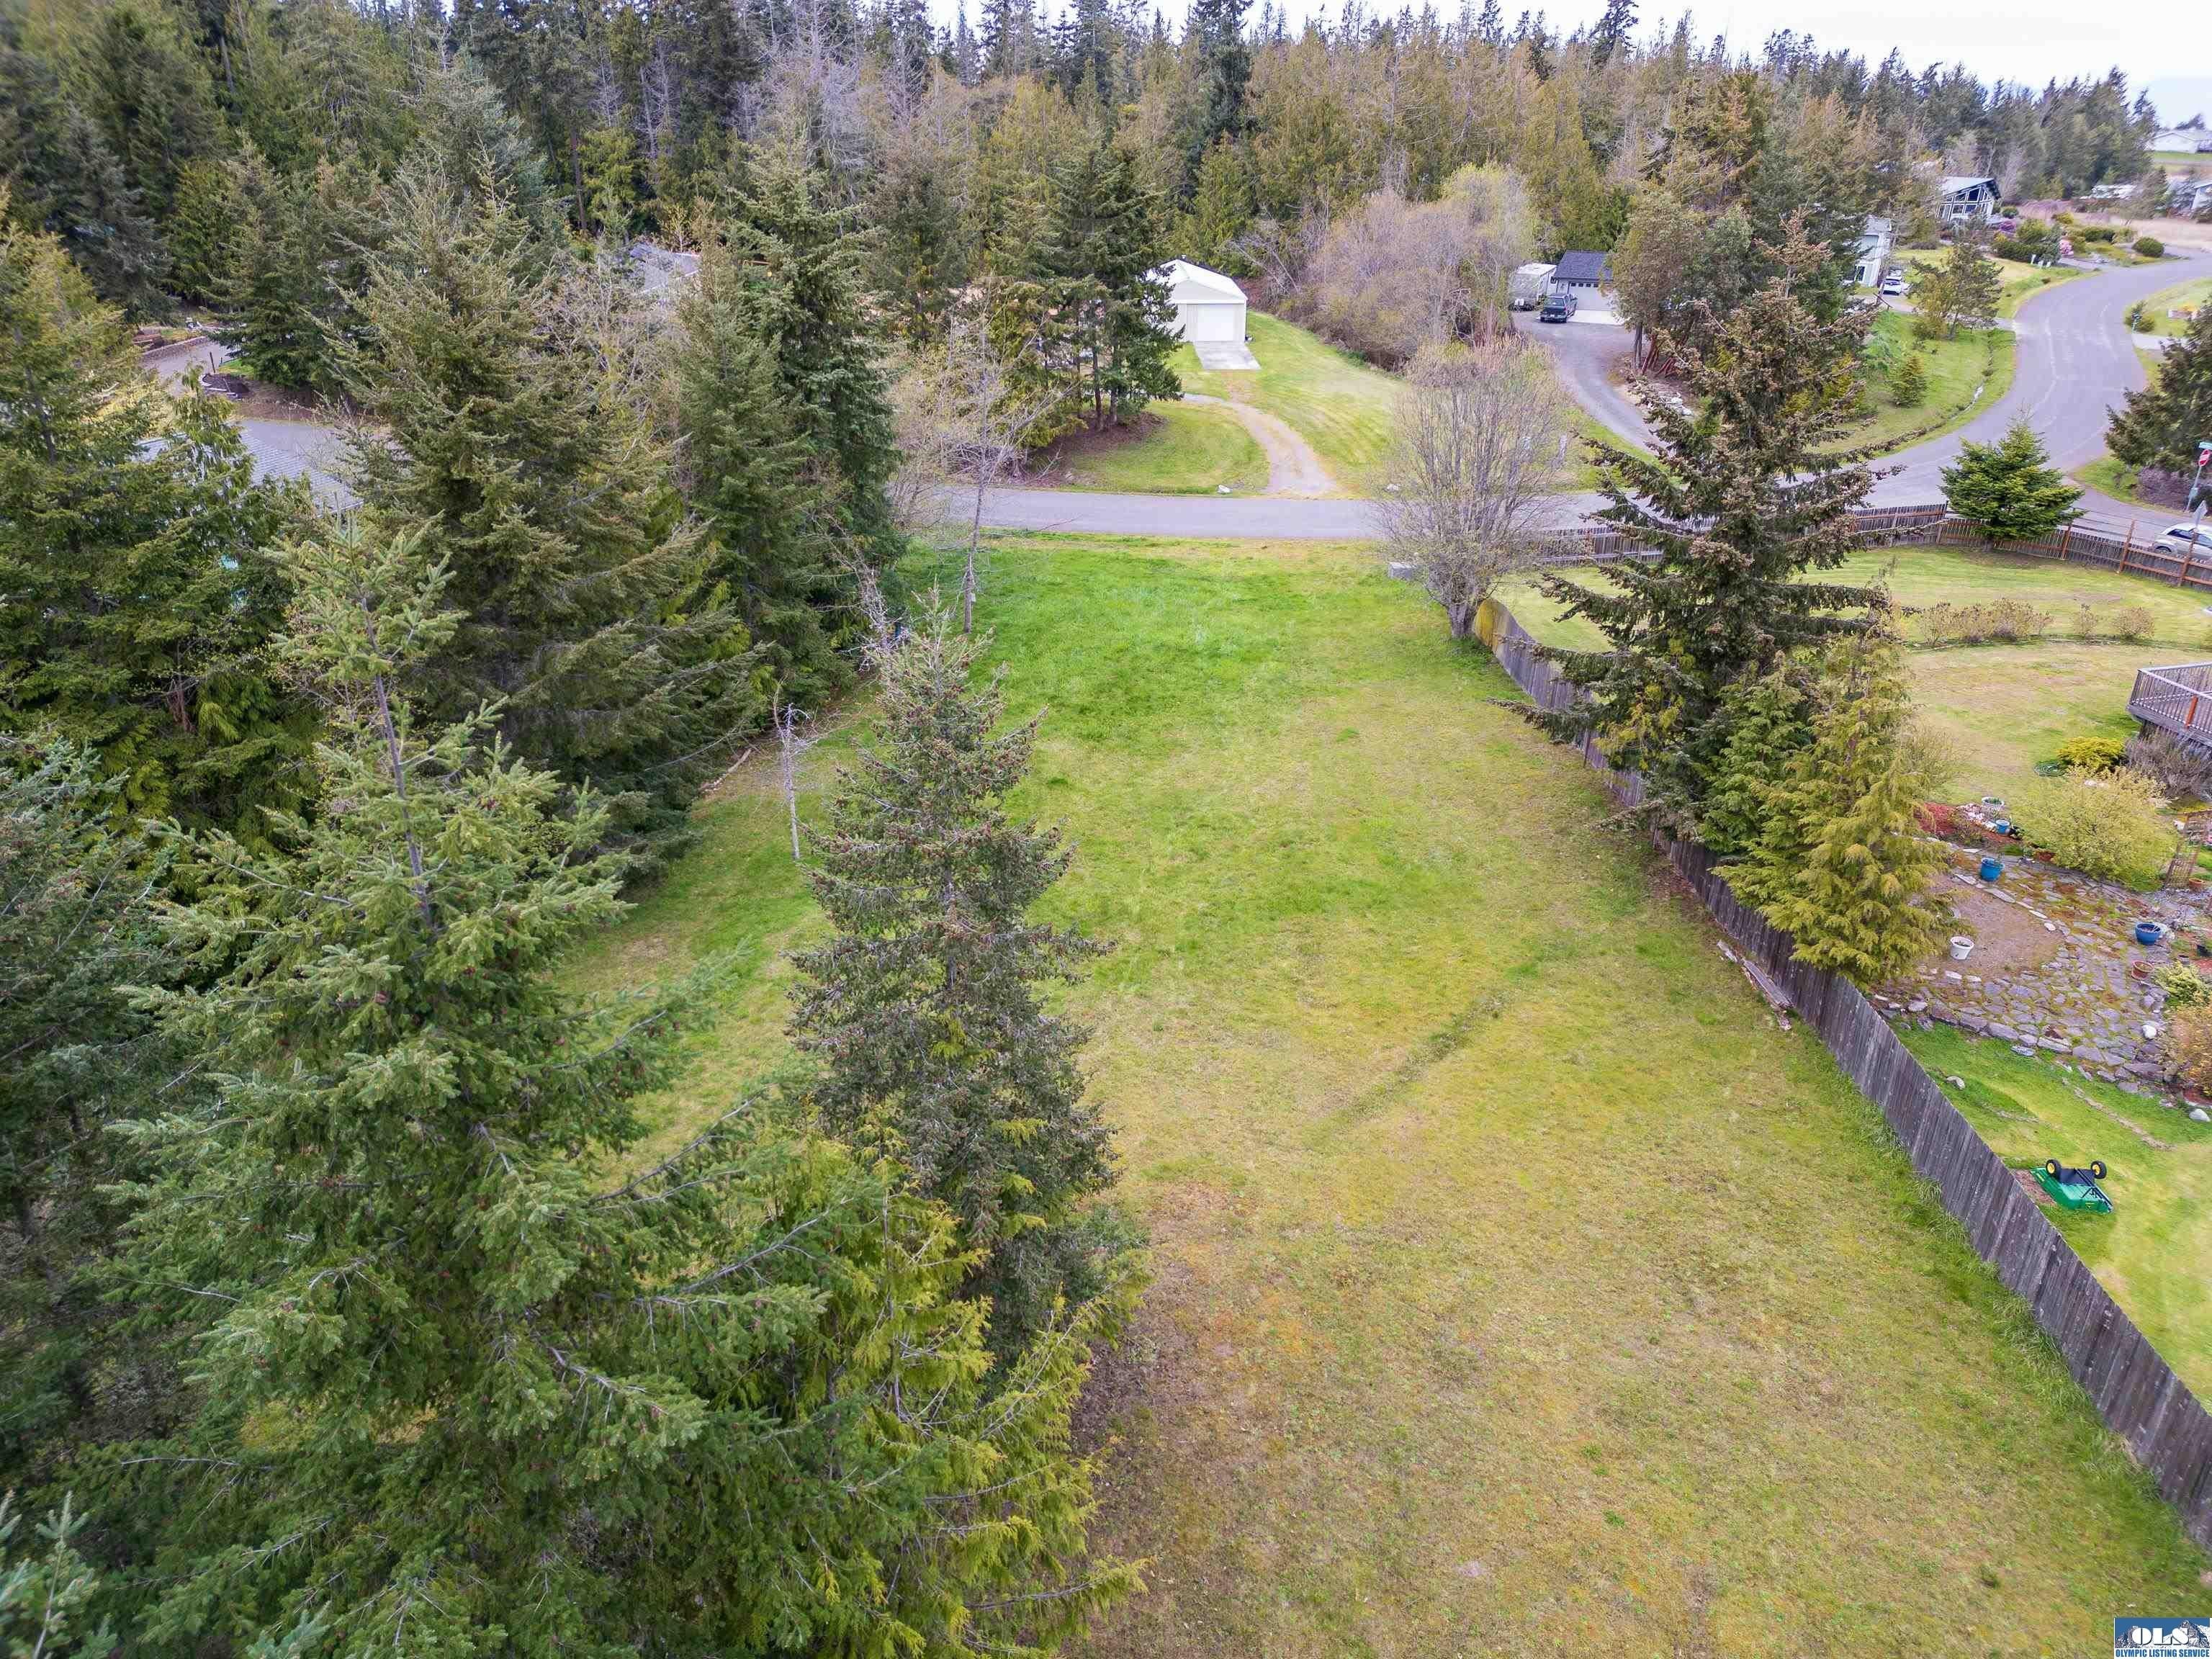 11. Rhododendron Drive Lot 5